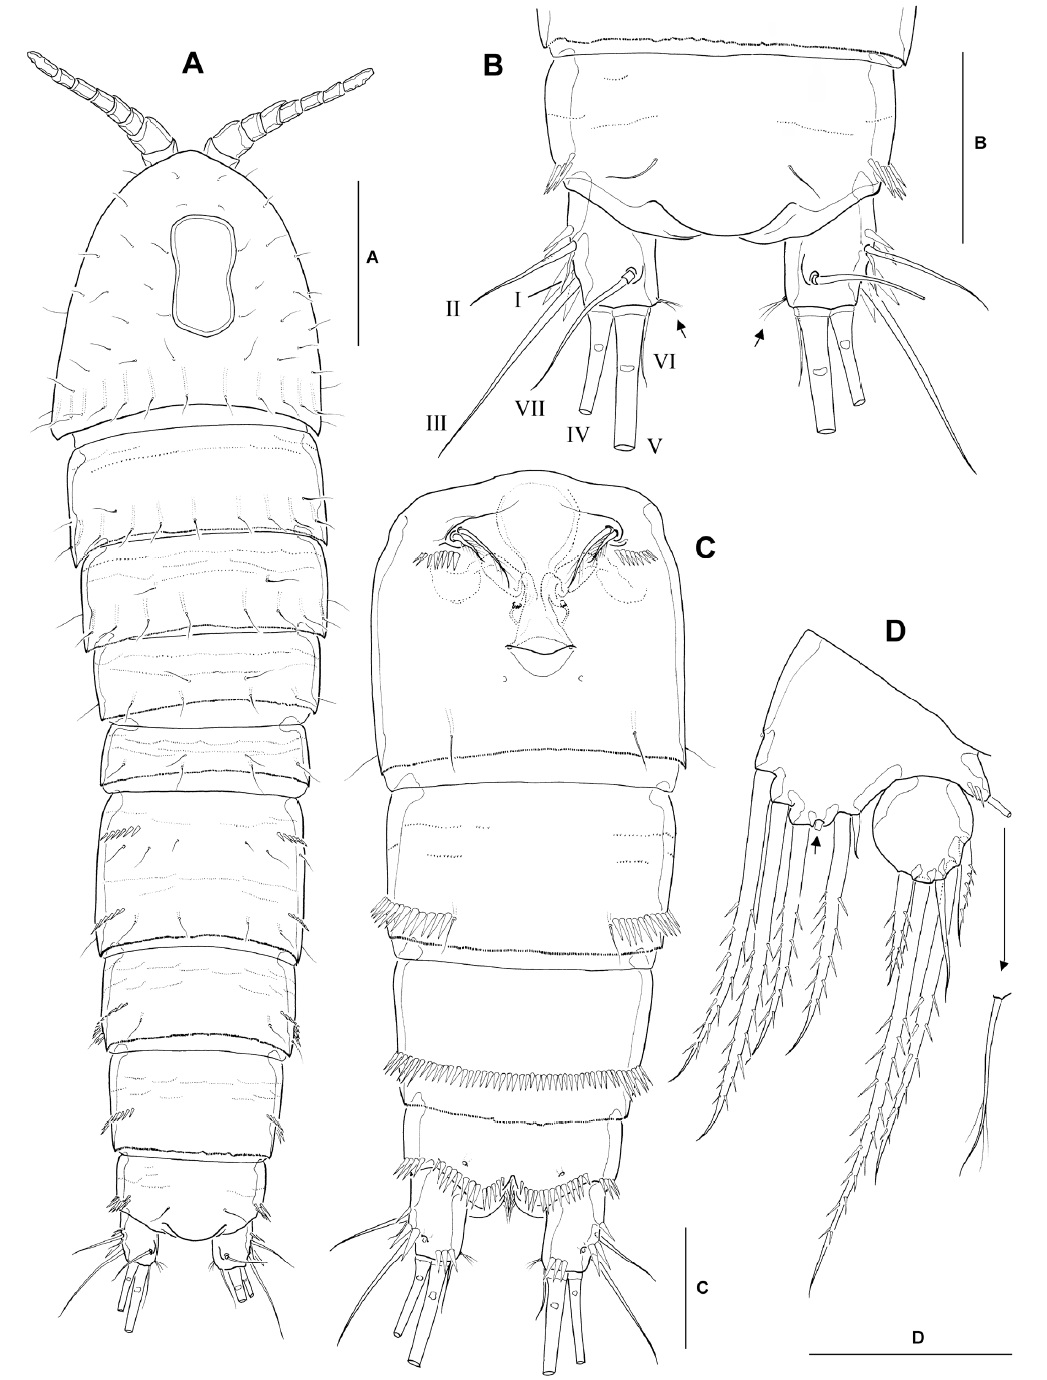 Bryocamptus jejuensis, female. A, Habitus, dorsal; B, Anal somite and caudal rami (arrows indicating setular tuft), dorsal; C, Urosome (excluding leg 5-bearing somite), ventral; D, Leg 5 (arrow indicating tube pore). Scale bars: A=0.1 mm, B-D=0.05 mm.